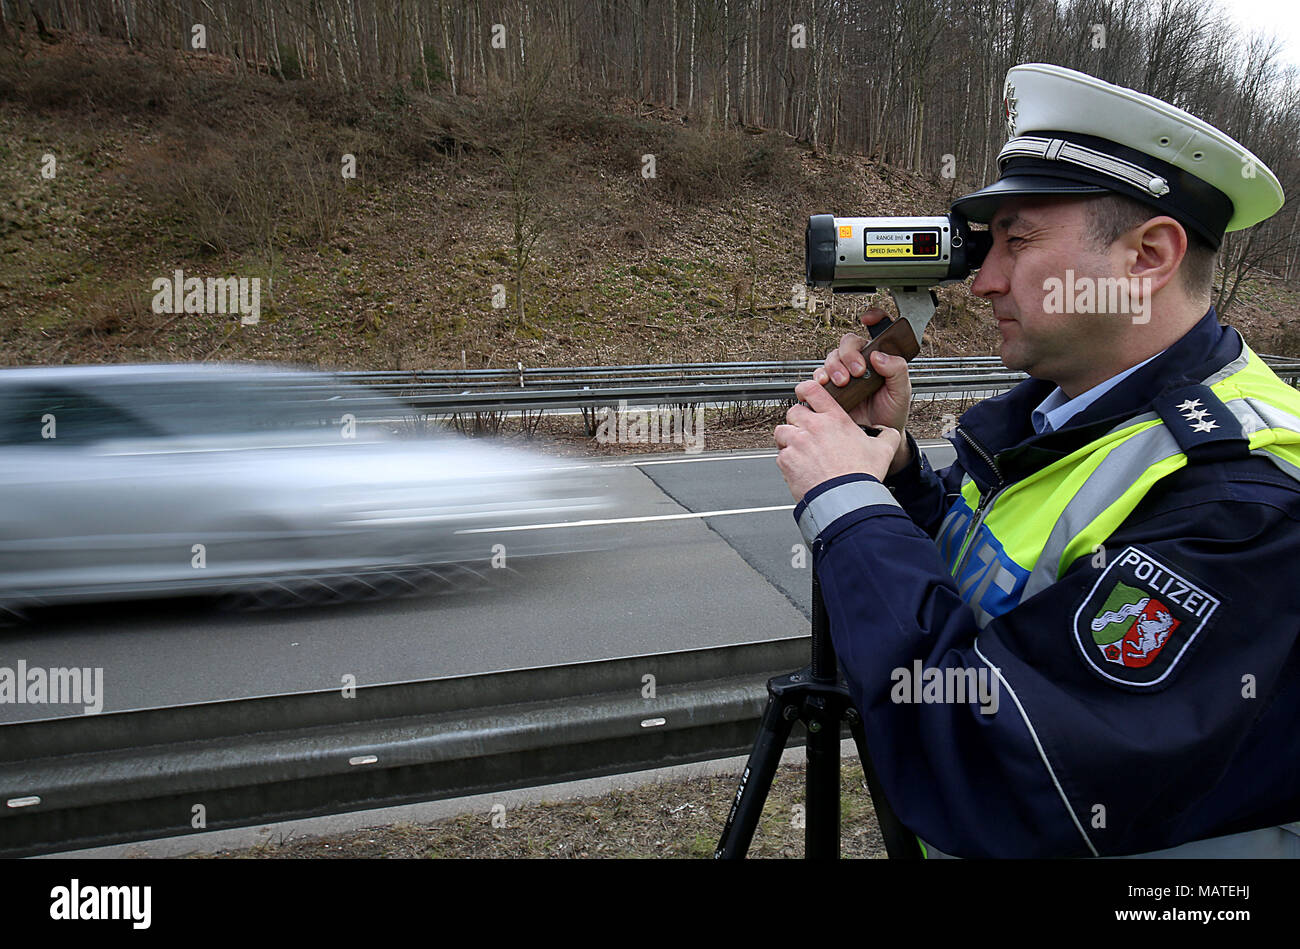 Page 3 - Pistol laser High Resolution Stock Photography and Images - Alamy